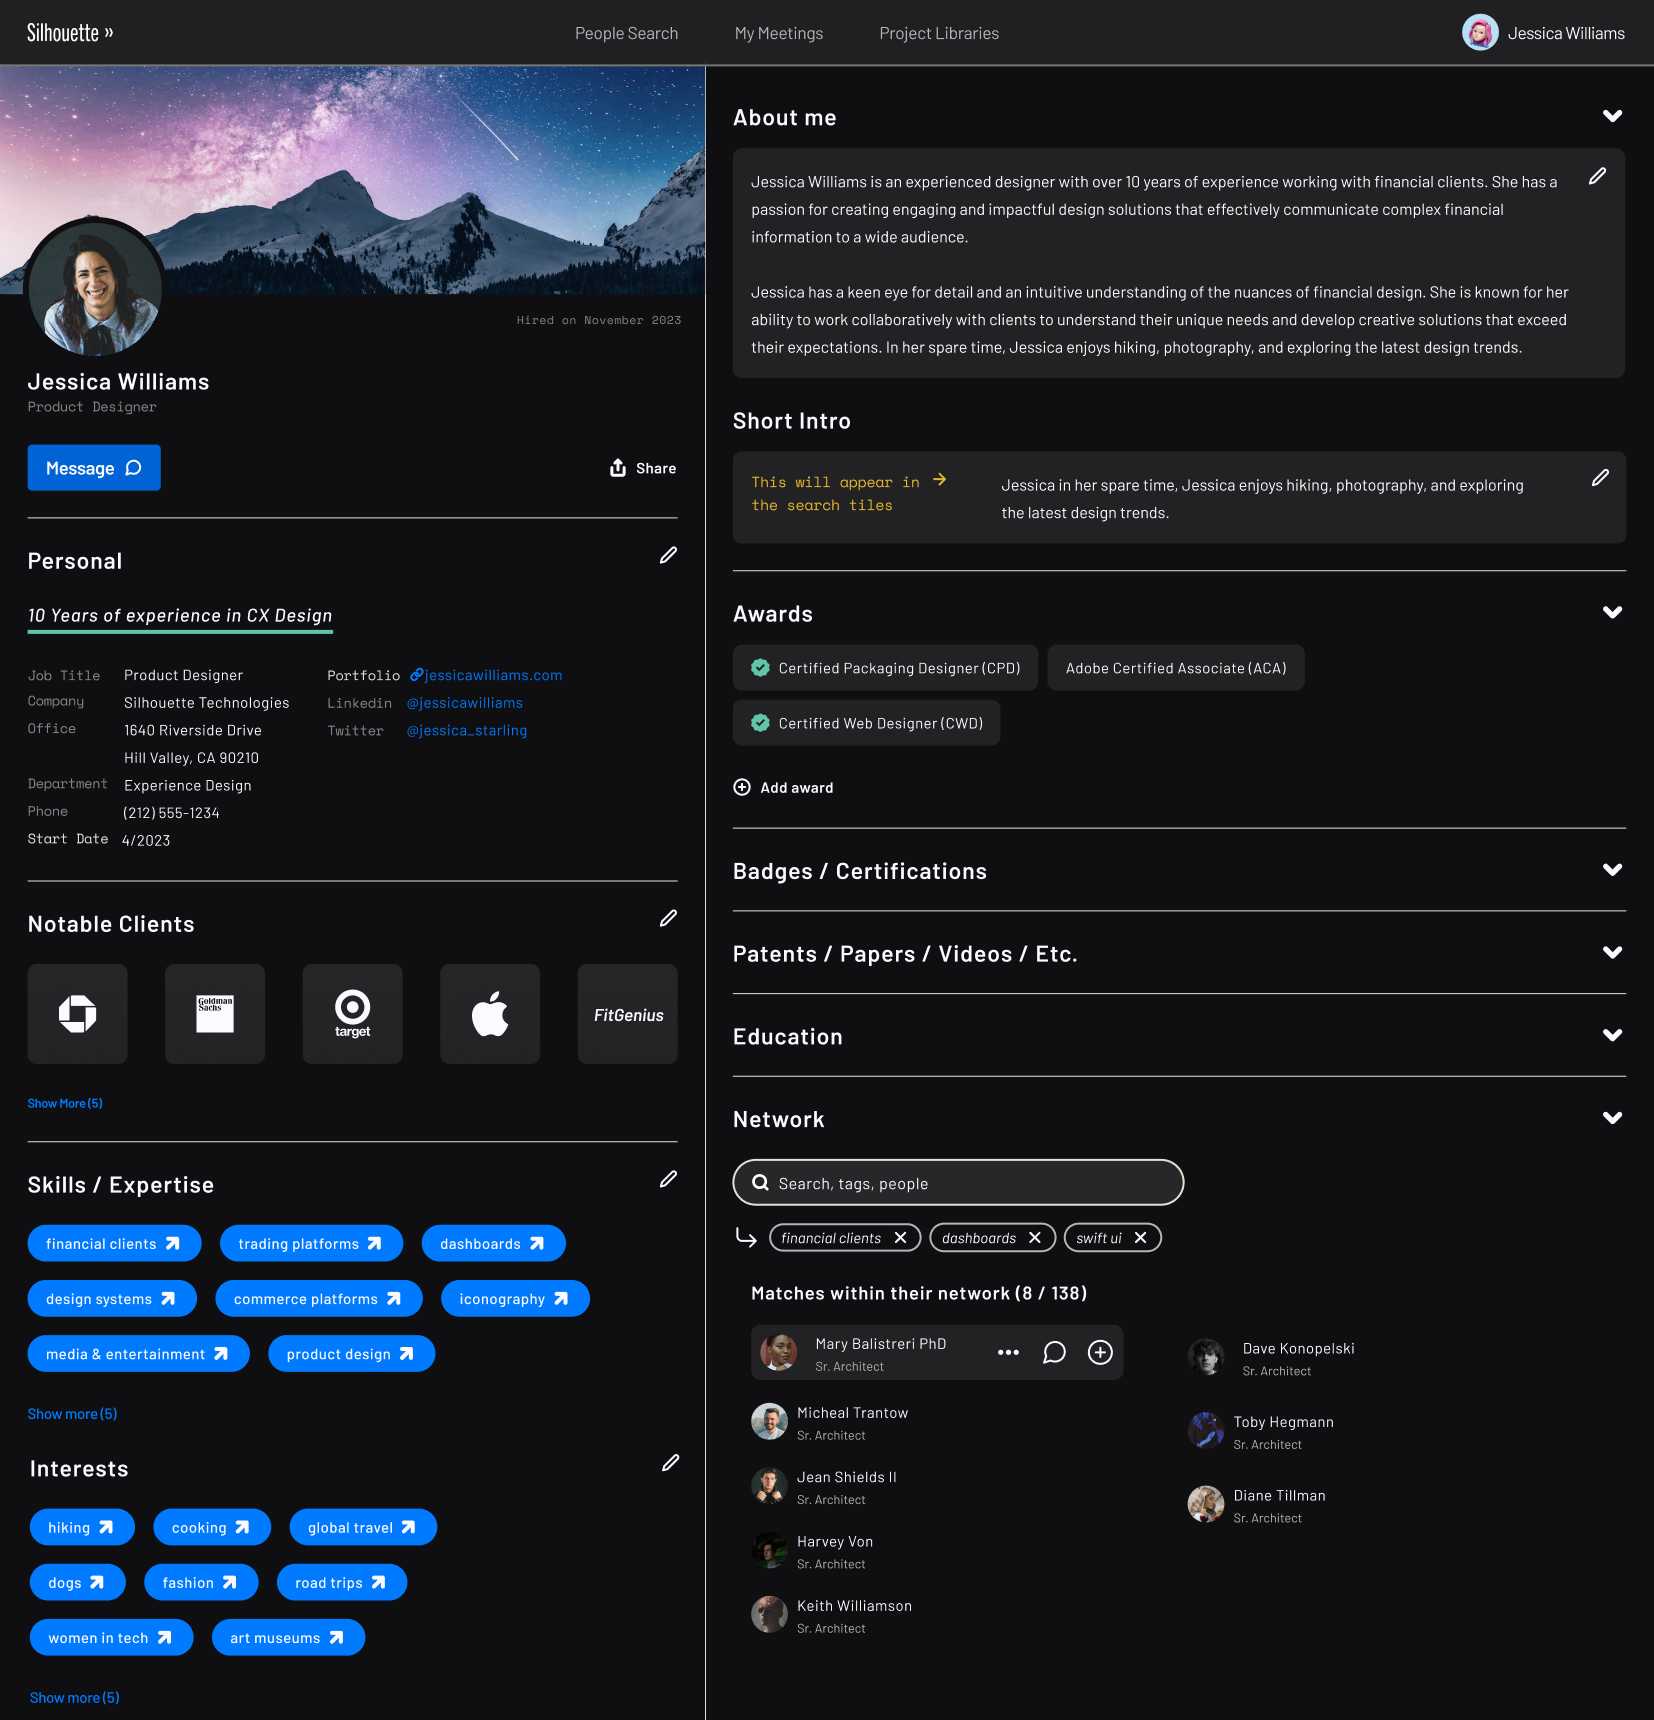 Screenshot of the employee view of the application